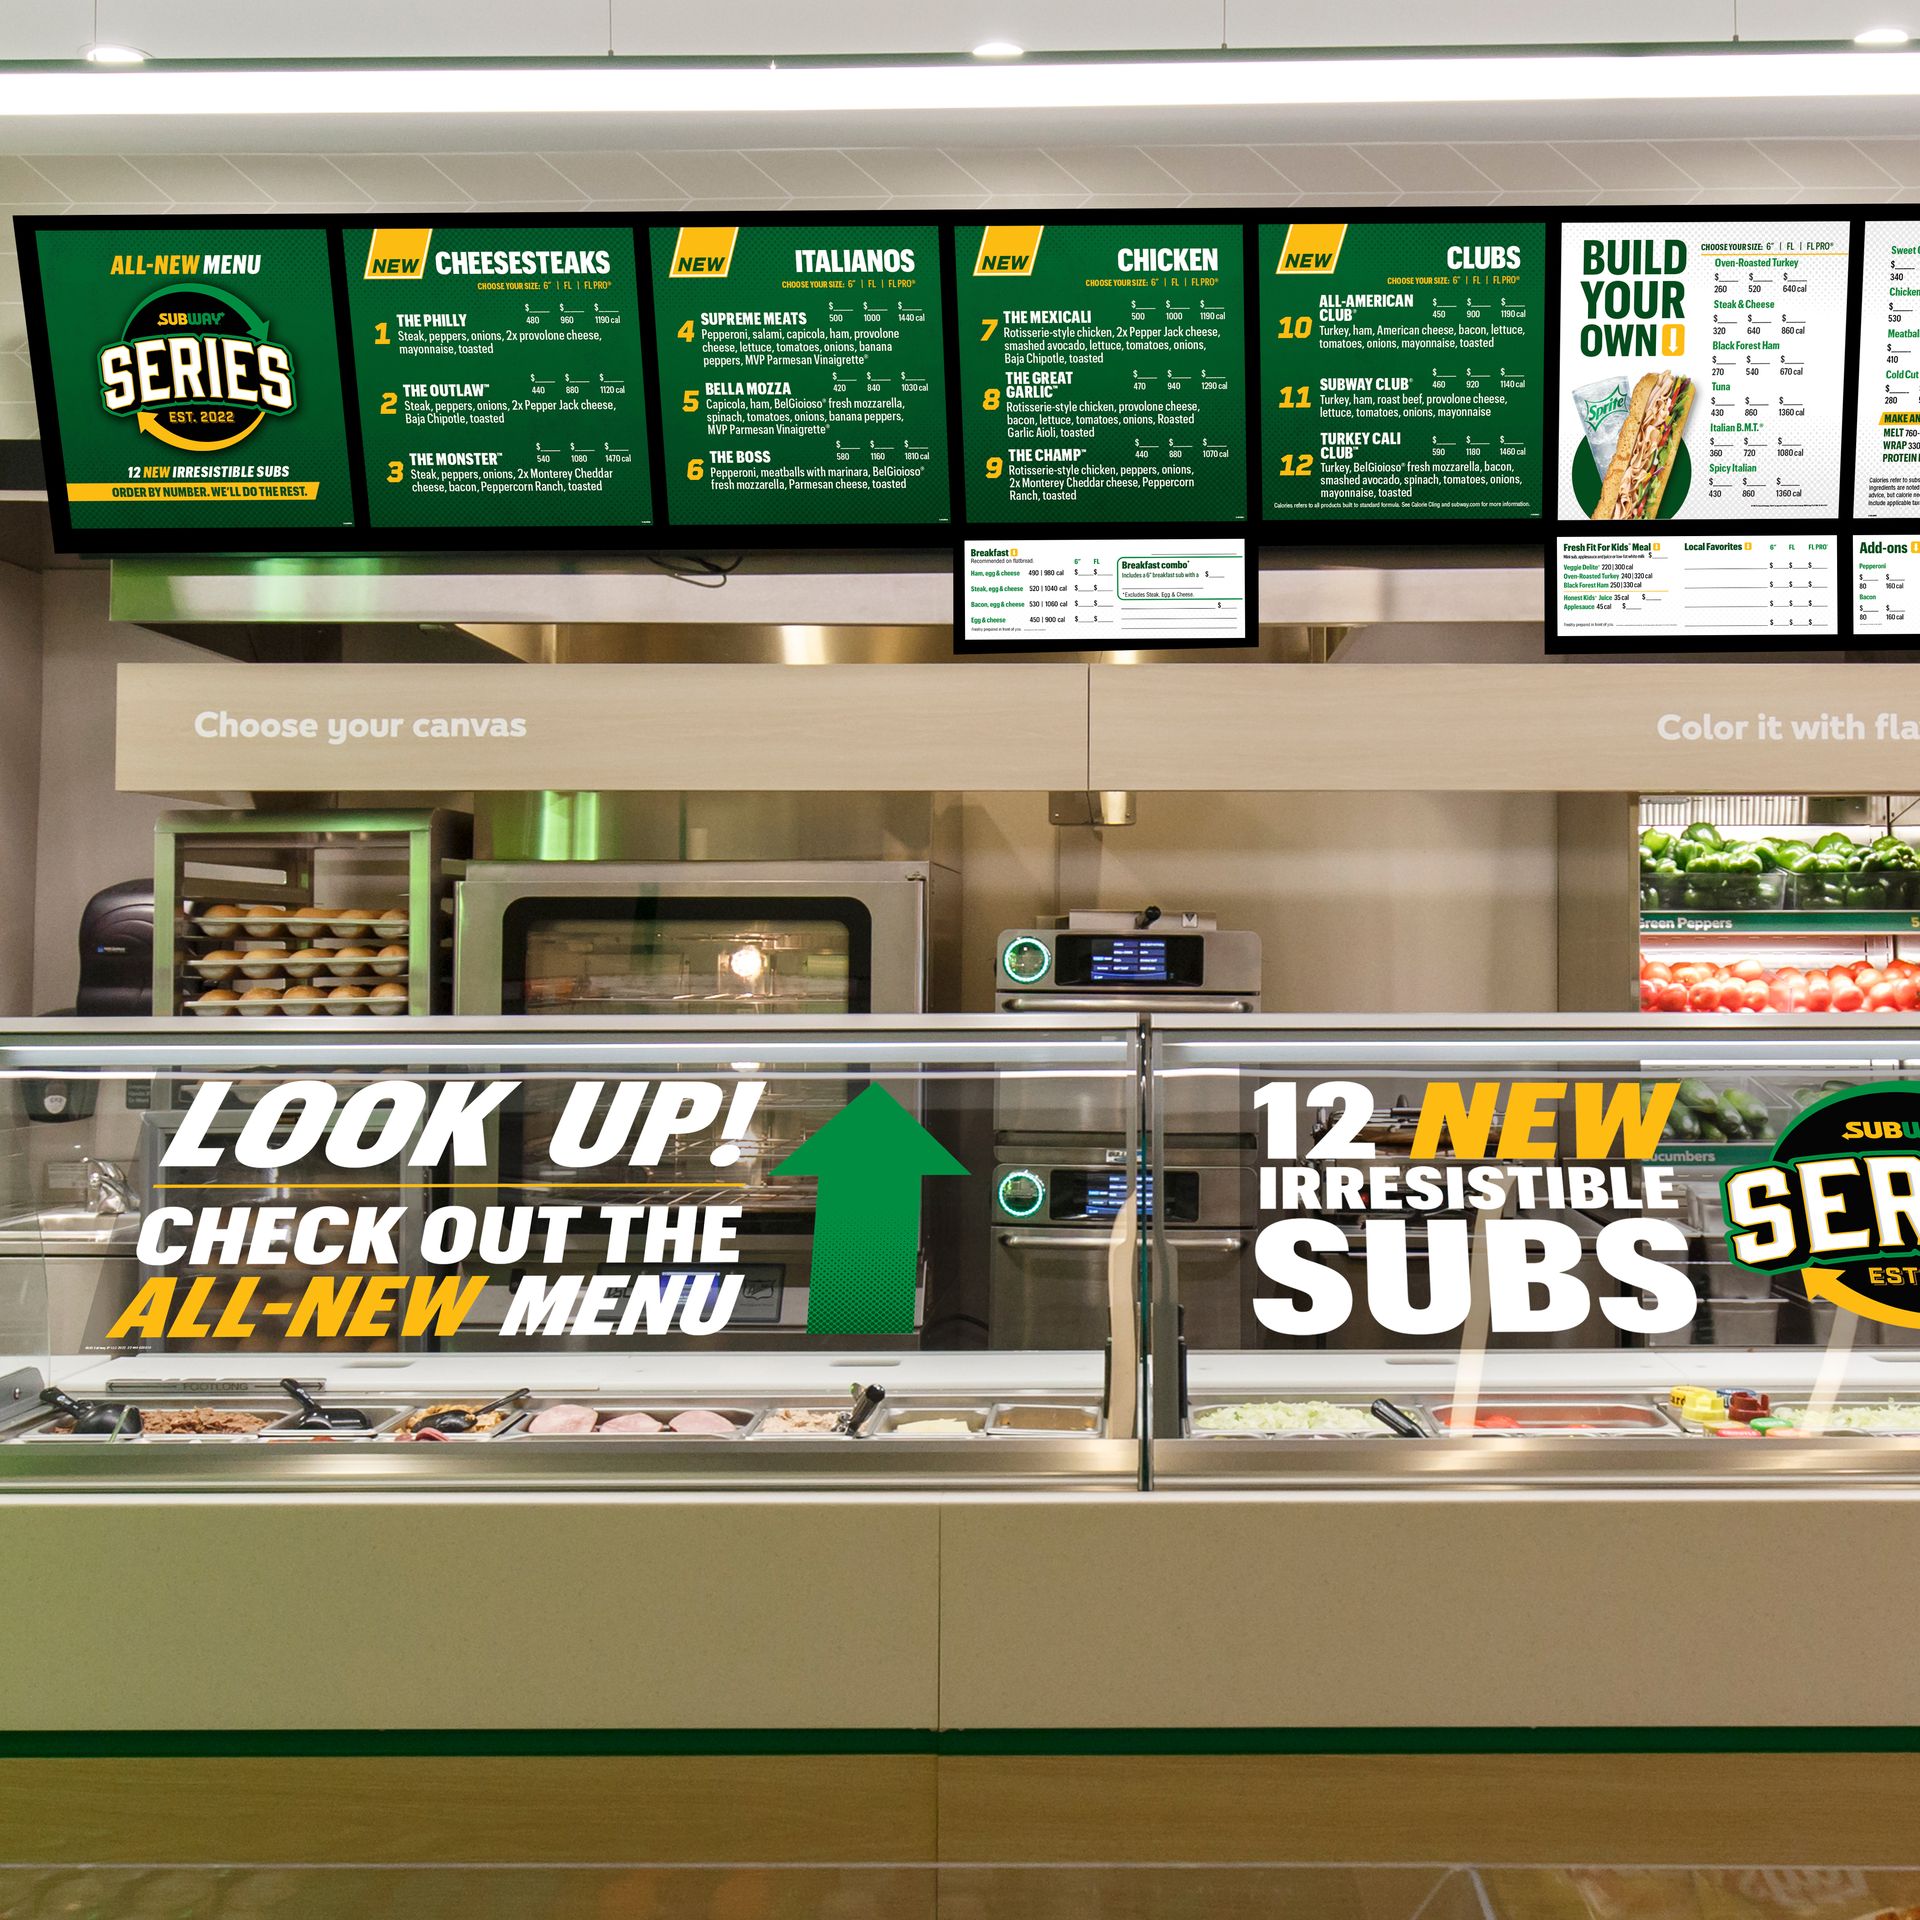 Subway has a new logo for the first time in 15 years